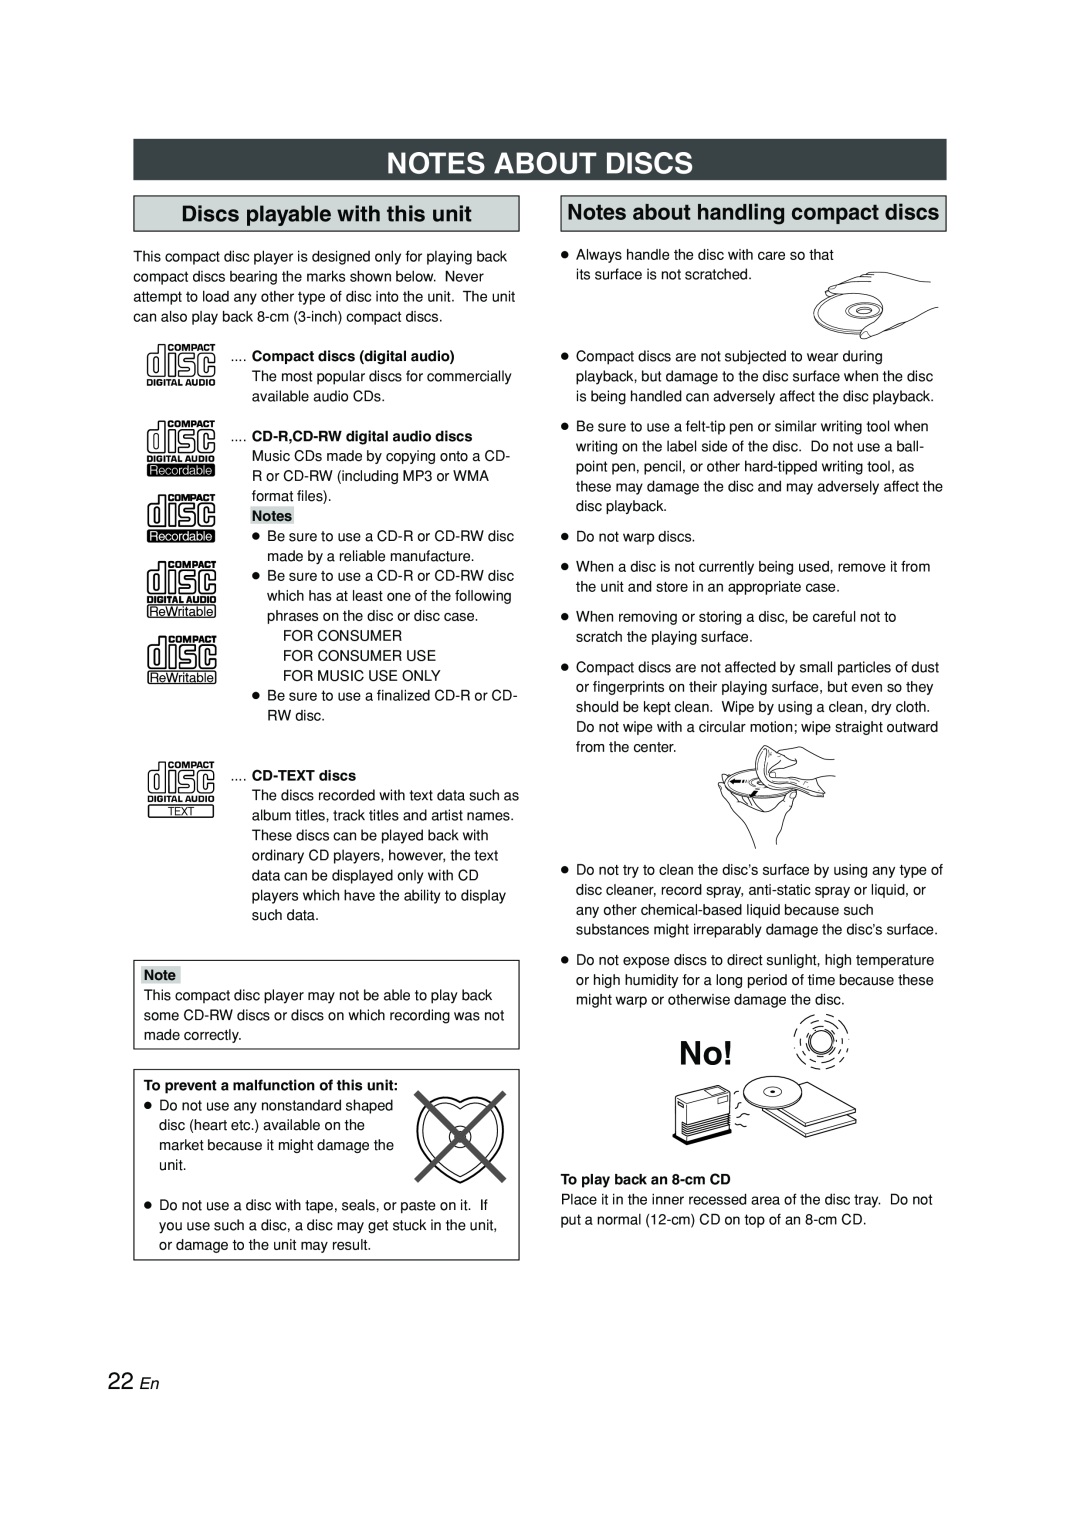 Yamaha CDX-397, CDX-97 owner manual Notes About Discs, 22 En 